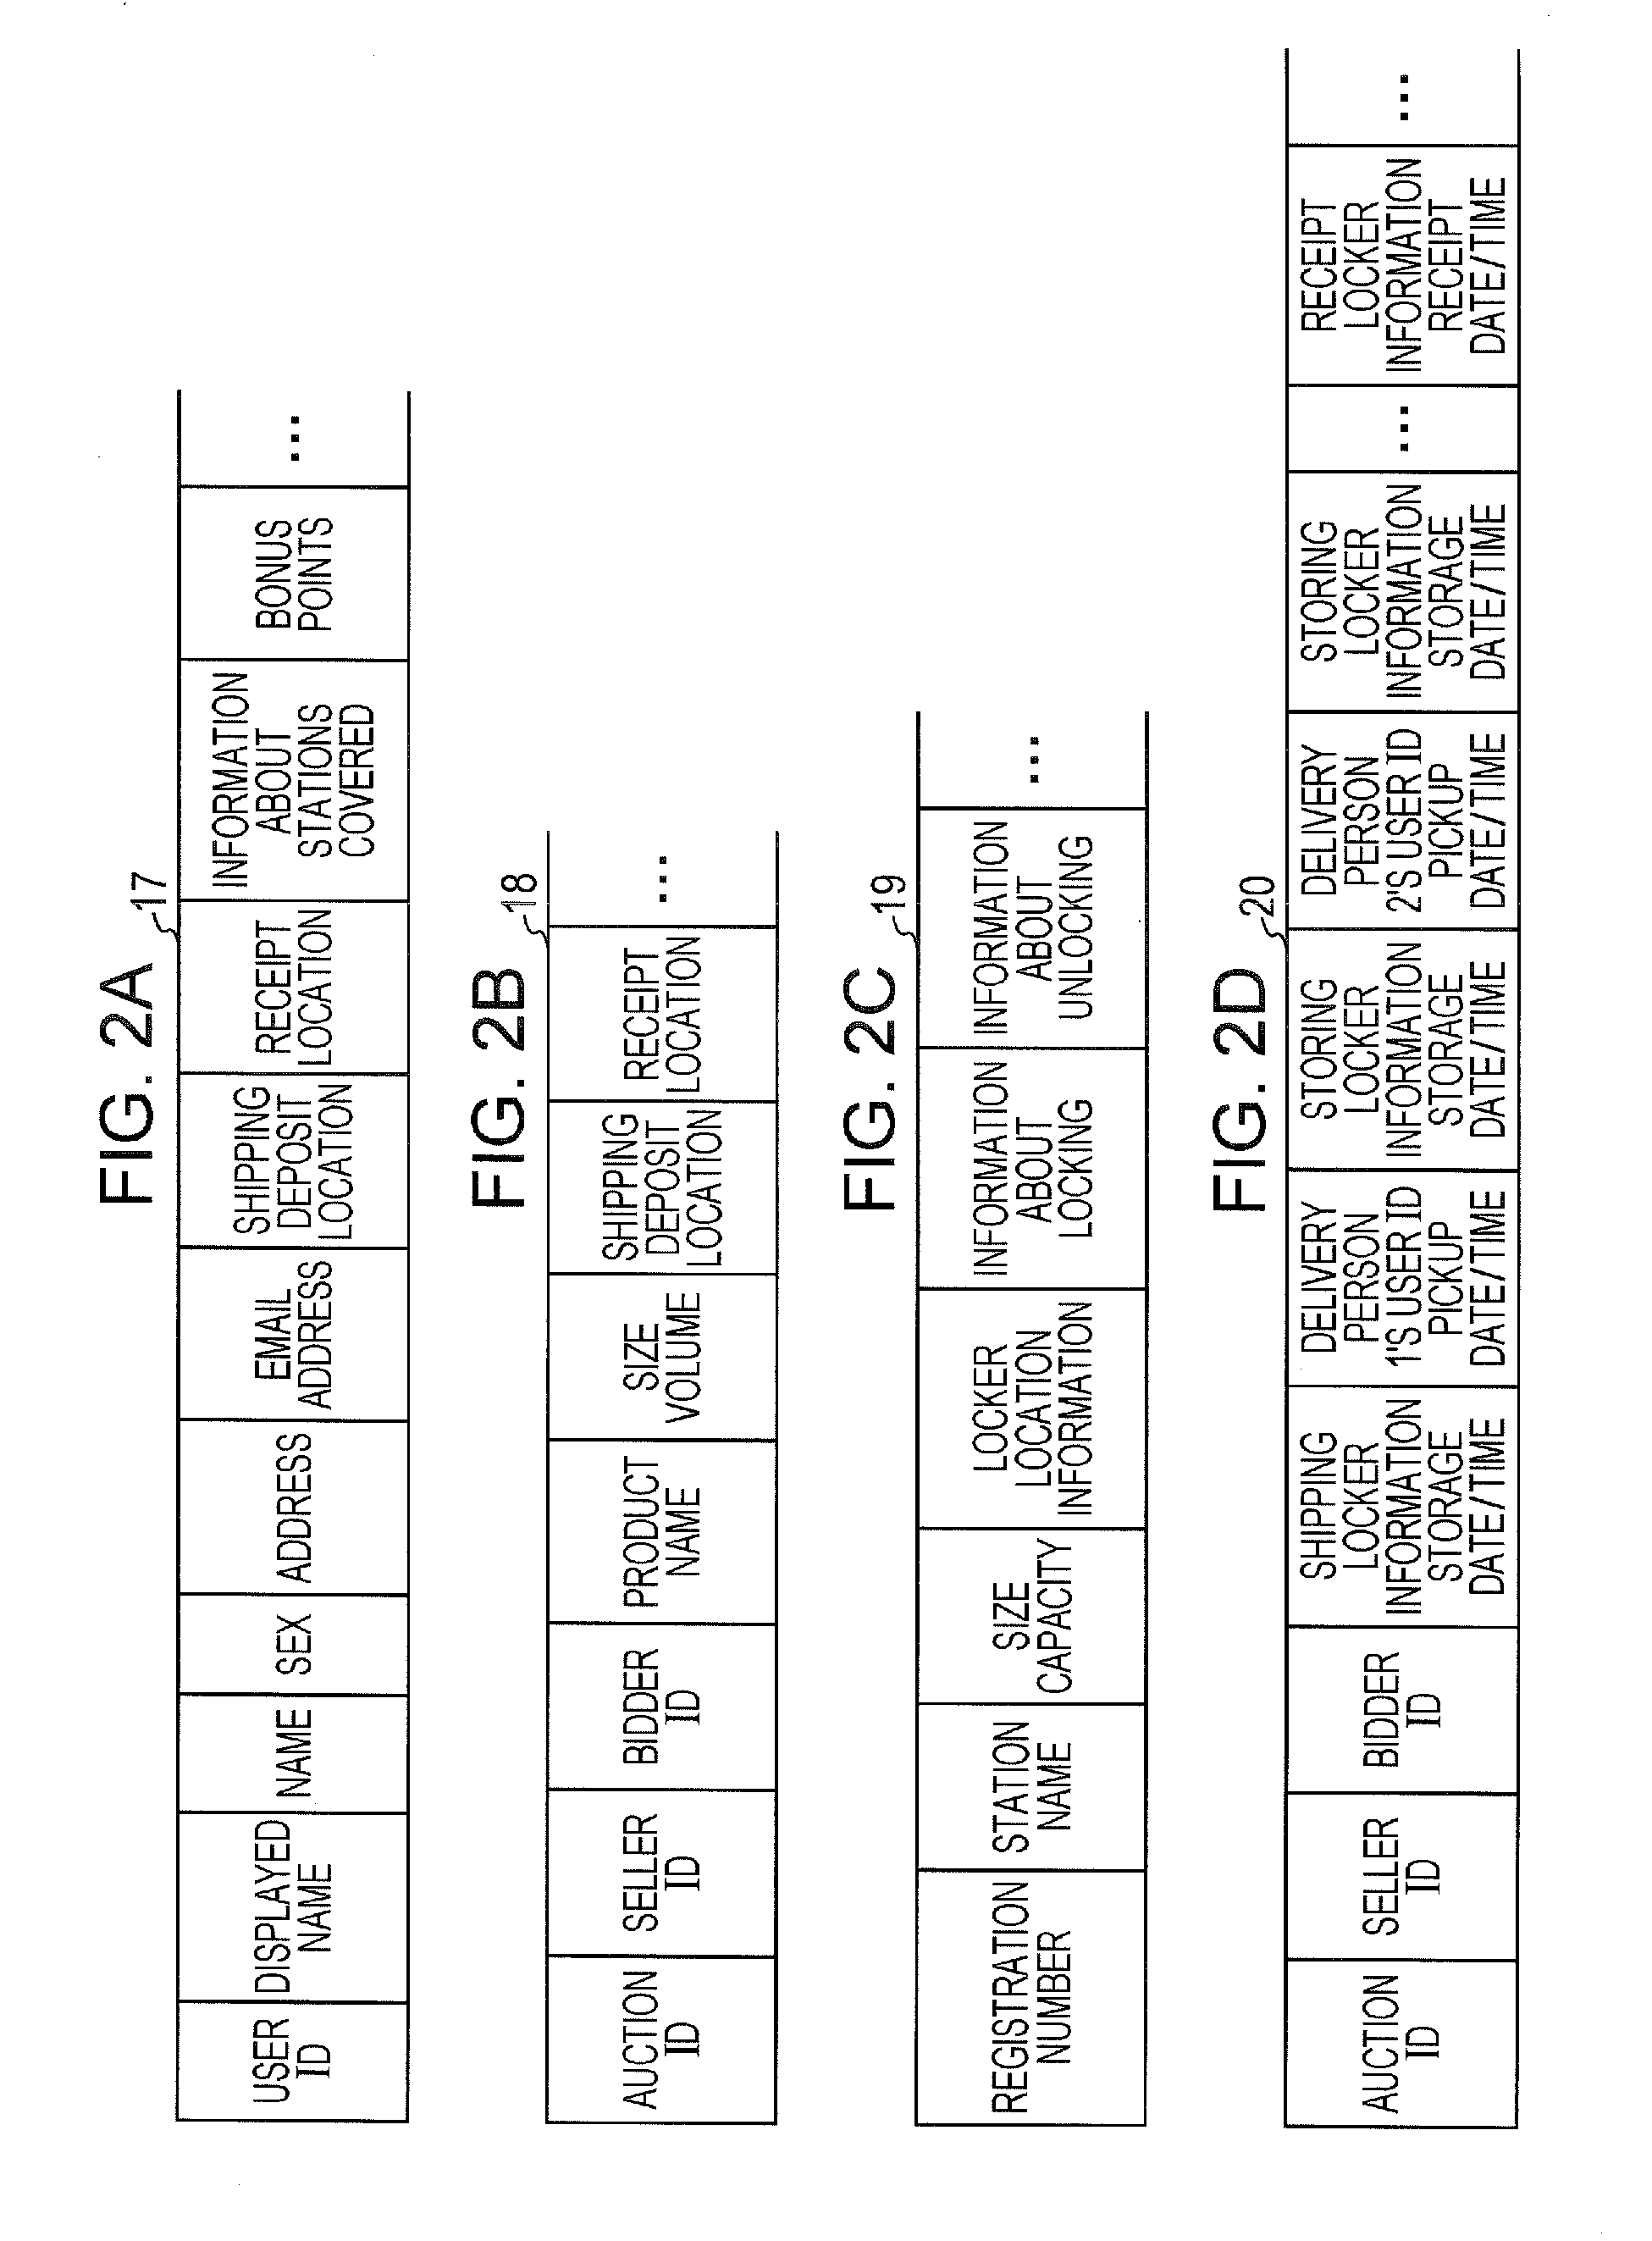 Delivery management apparatus and recording medium